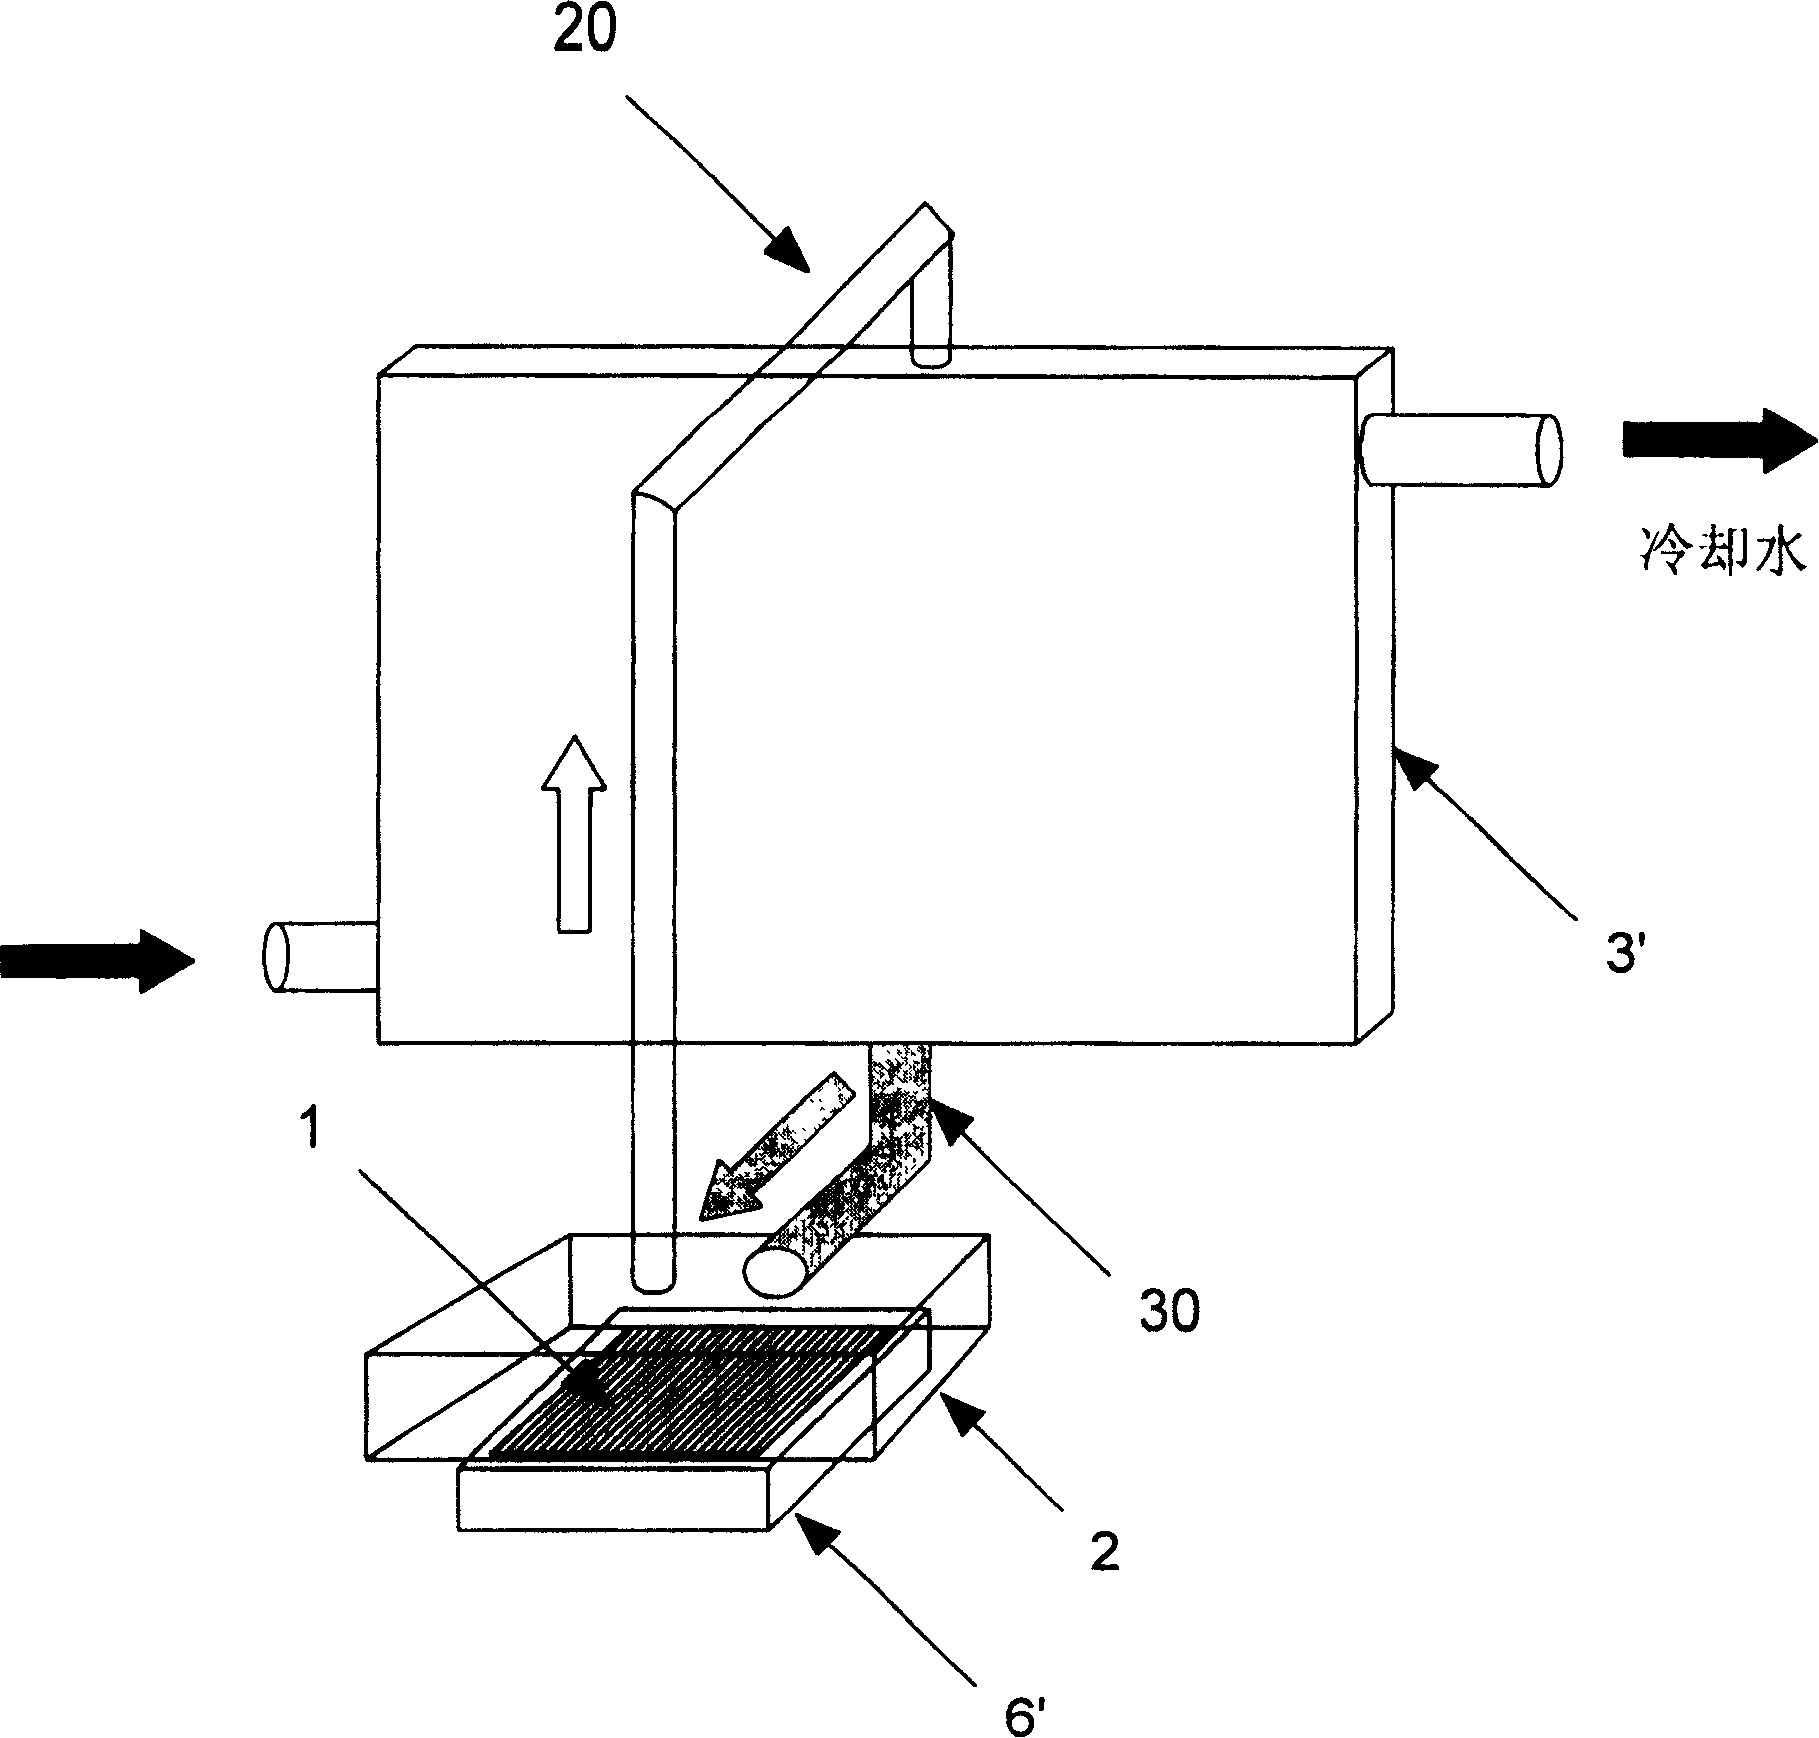 High-performance passive phase-change radiation system and its application